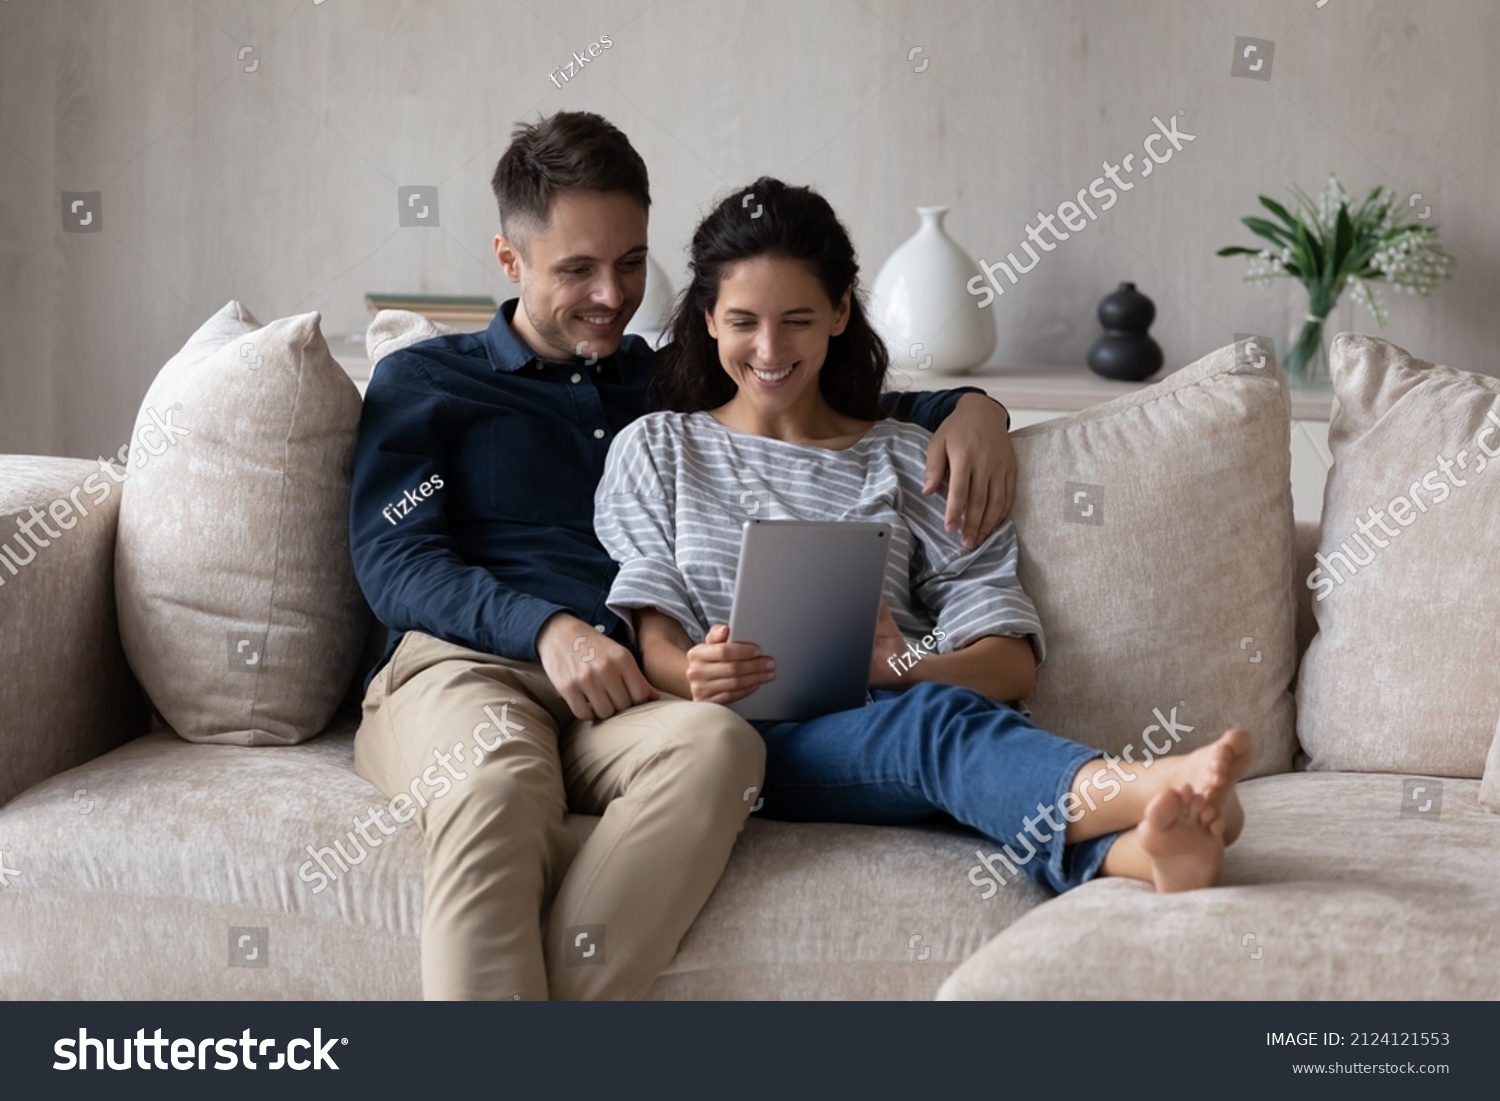 Millennial husband and wife using online application on tablet, watching media content, movie, talking on video call together. Happy couple holding digital gadget, relaxing on cozy couch at home, #2124121553